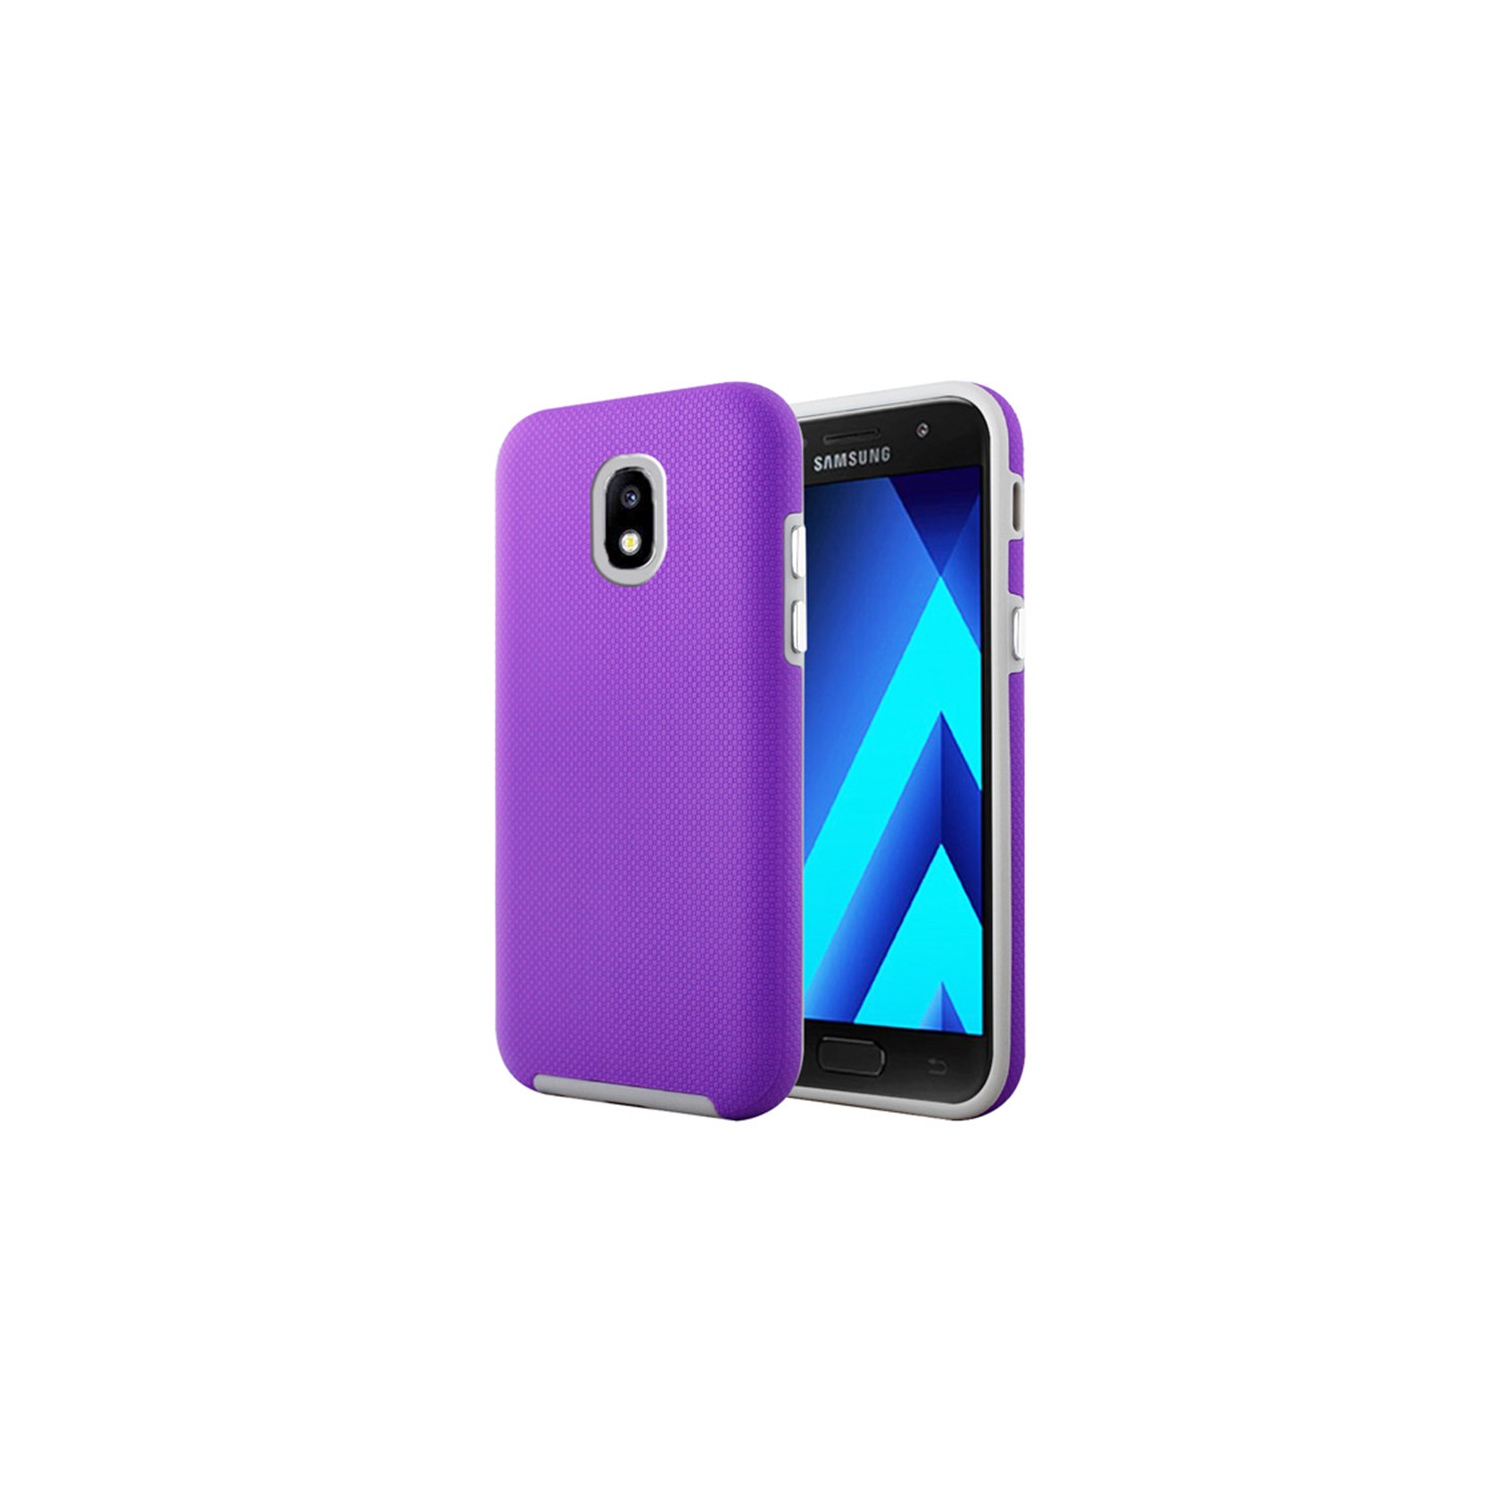 【CSmart】 Slim Fitted Hybrid Hard PC Shell Shockproof Scratch Resistant Case Cover for Samsung Galaxy J3 2018, Purple